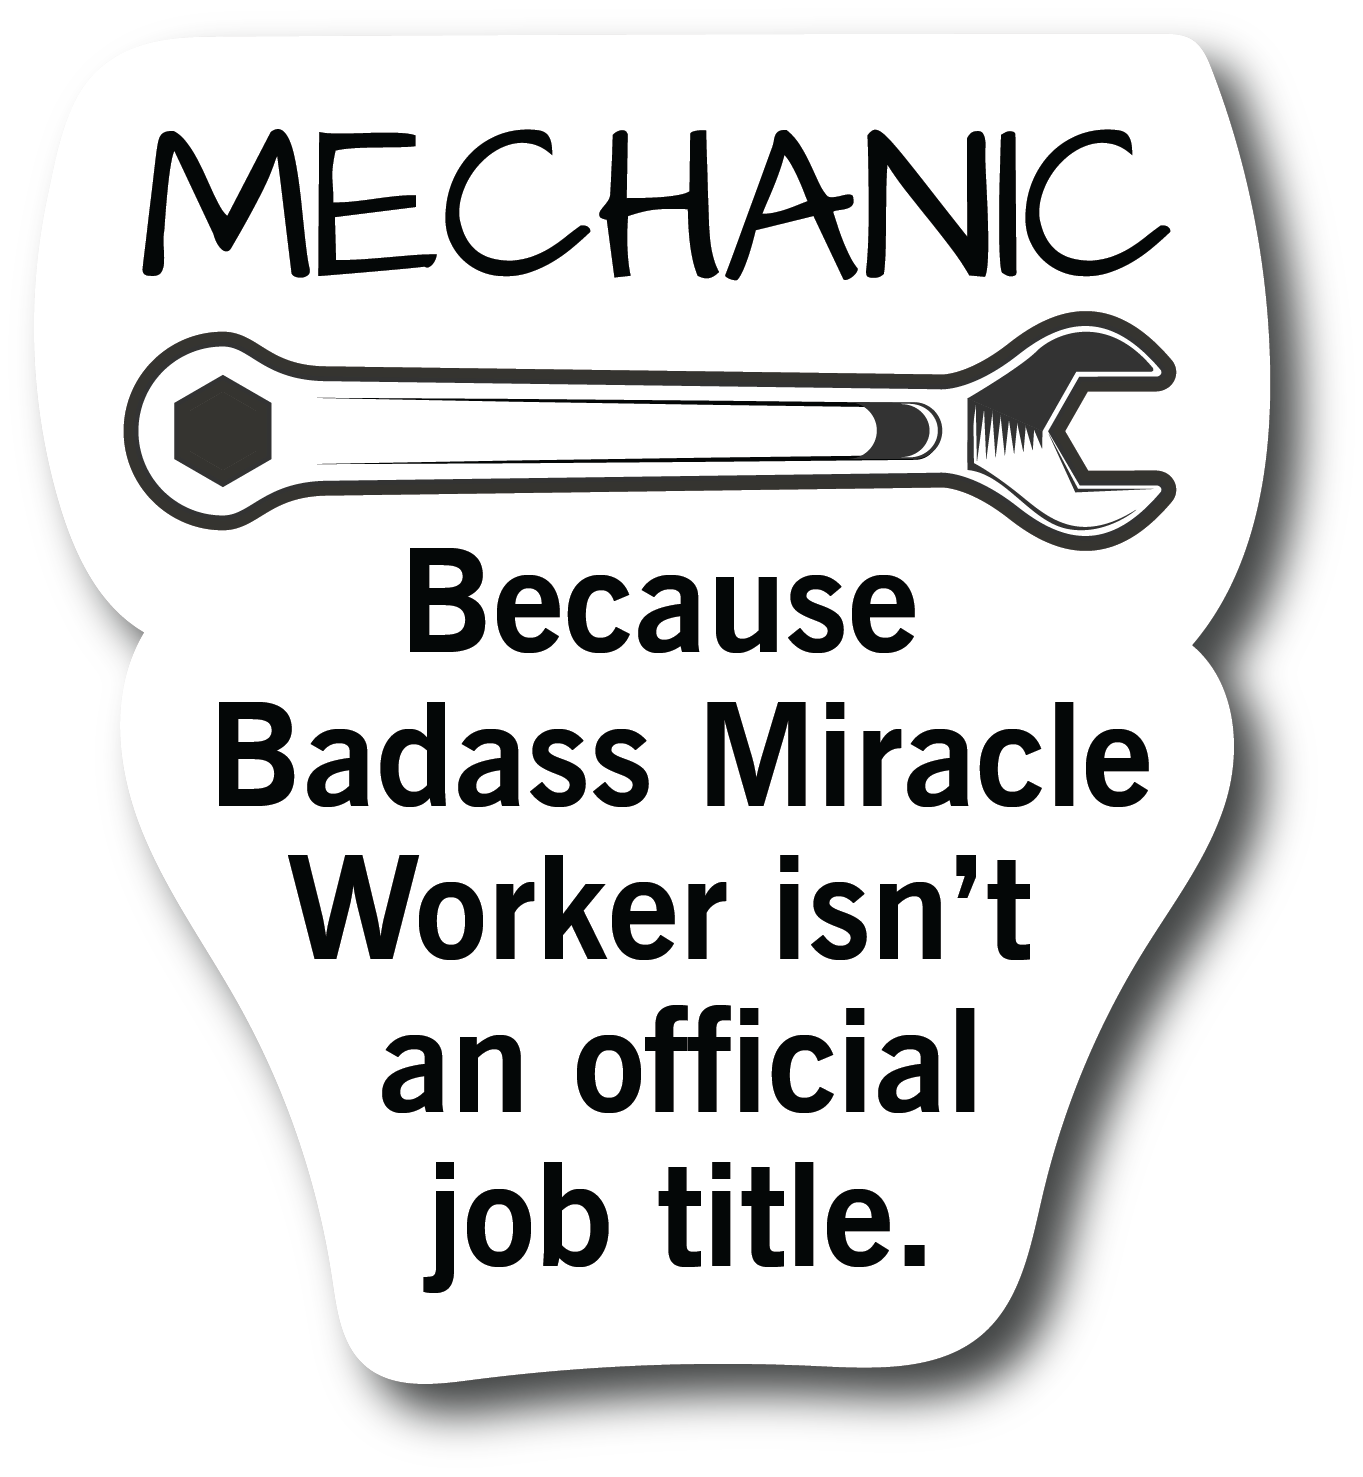 Mechanic Because Badass Miracle Worker Isnt a official Job Title 4.5 In Sticker